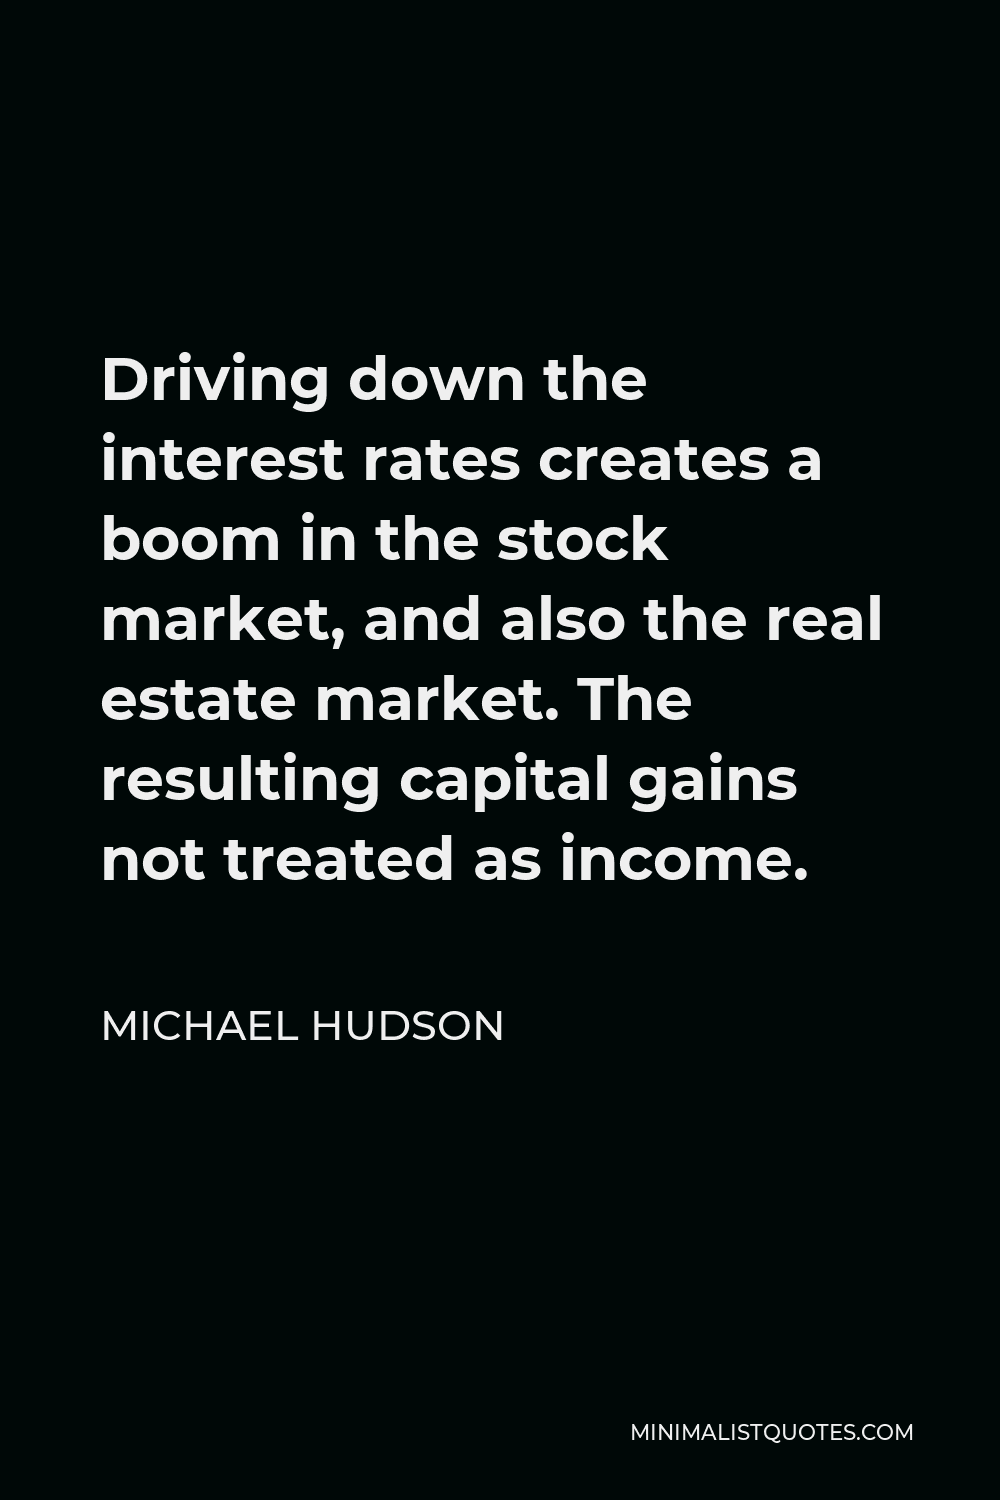 Michael Hudson Quote - Driving down the interest rates creates a boom in the stock market, and also the real estate market. The resulting capital gains not treated as income.